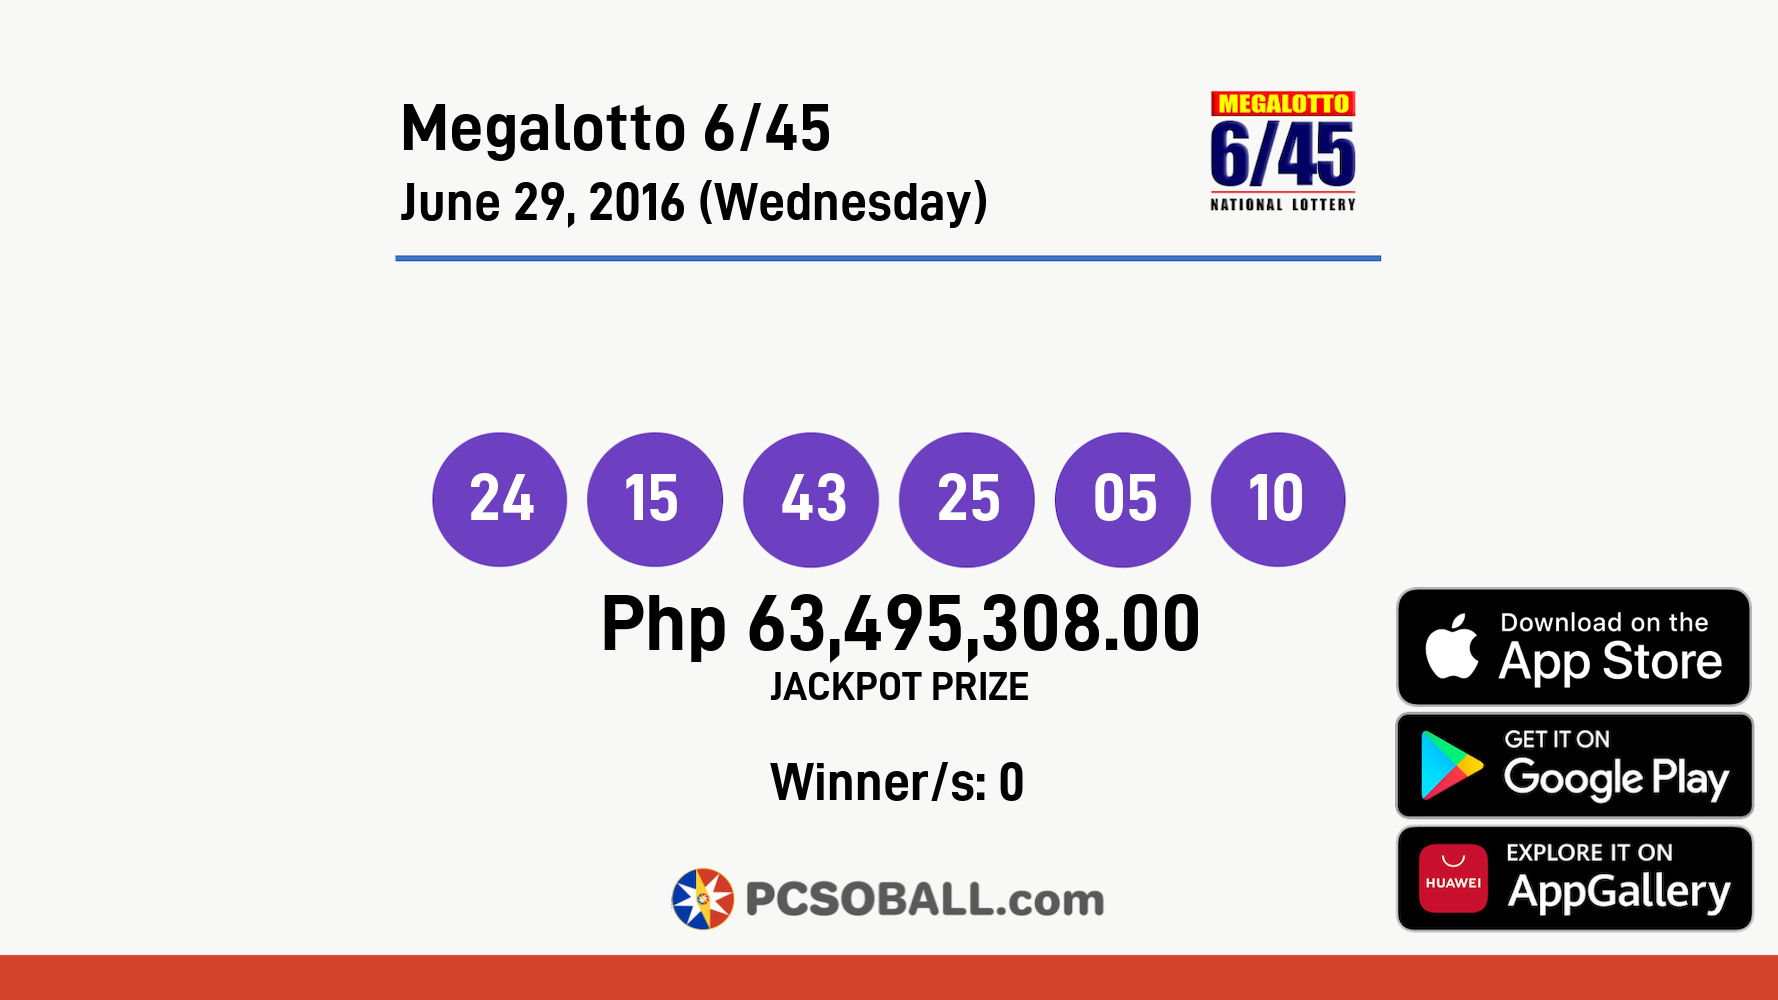 Megalotto 6/45 June 29, 2016 (Wednesday) Result